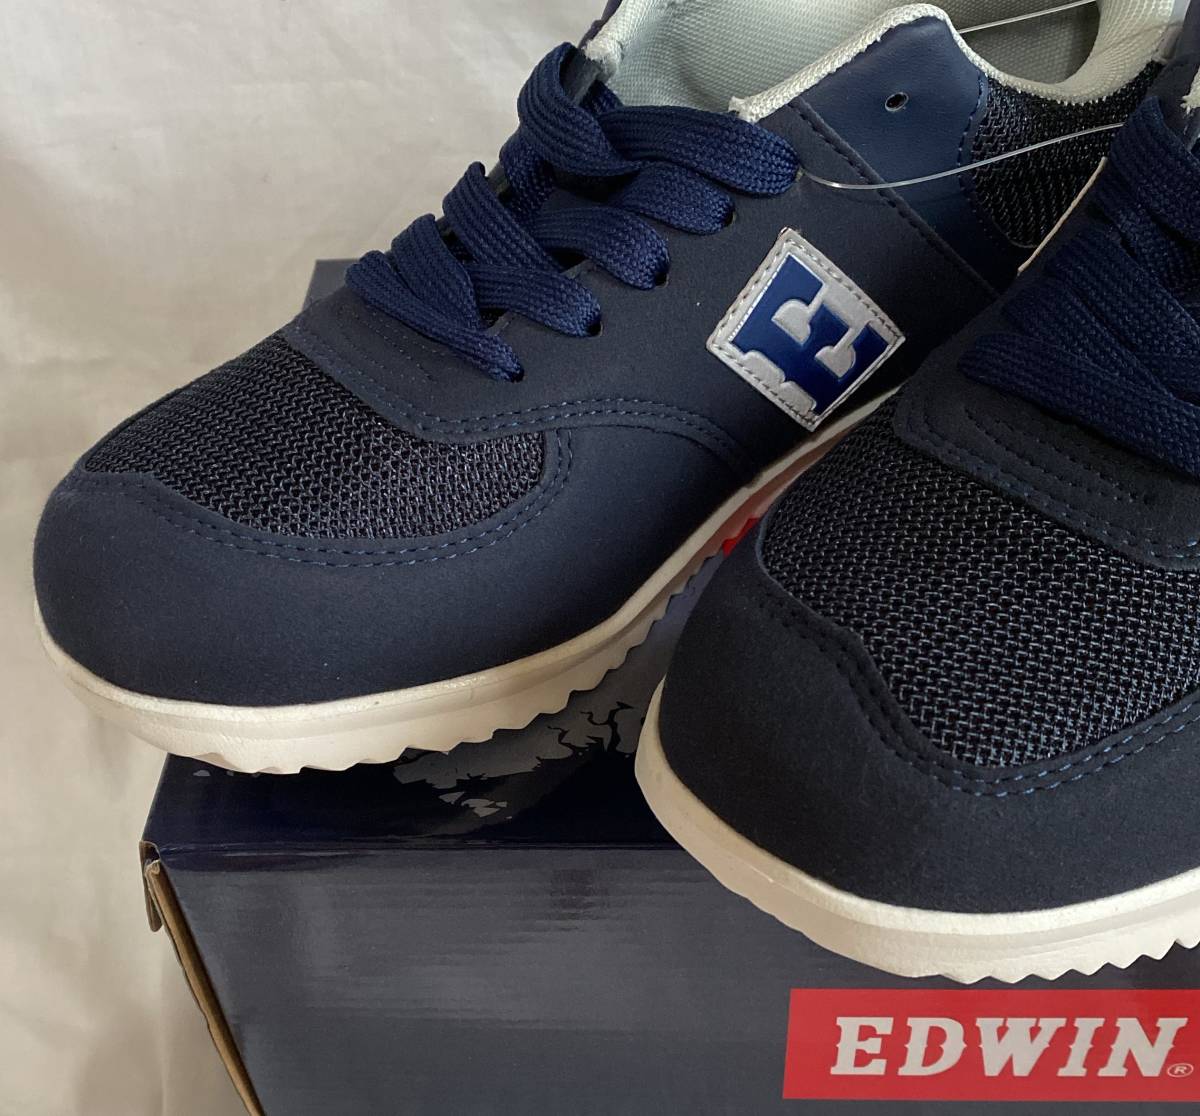 uo- King shoes 26.5cm EDWIN/ Edwin navy color series cup insole reflection material light weight VV unused goods 